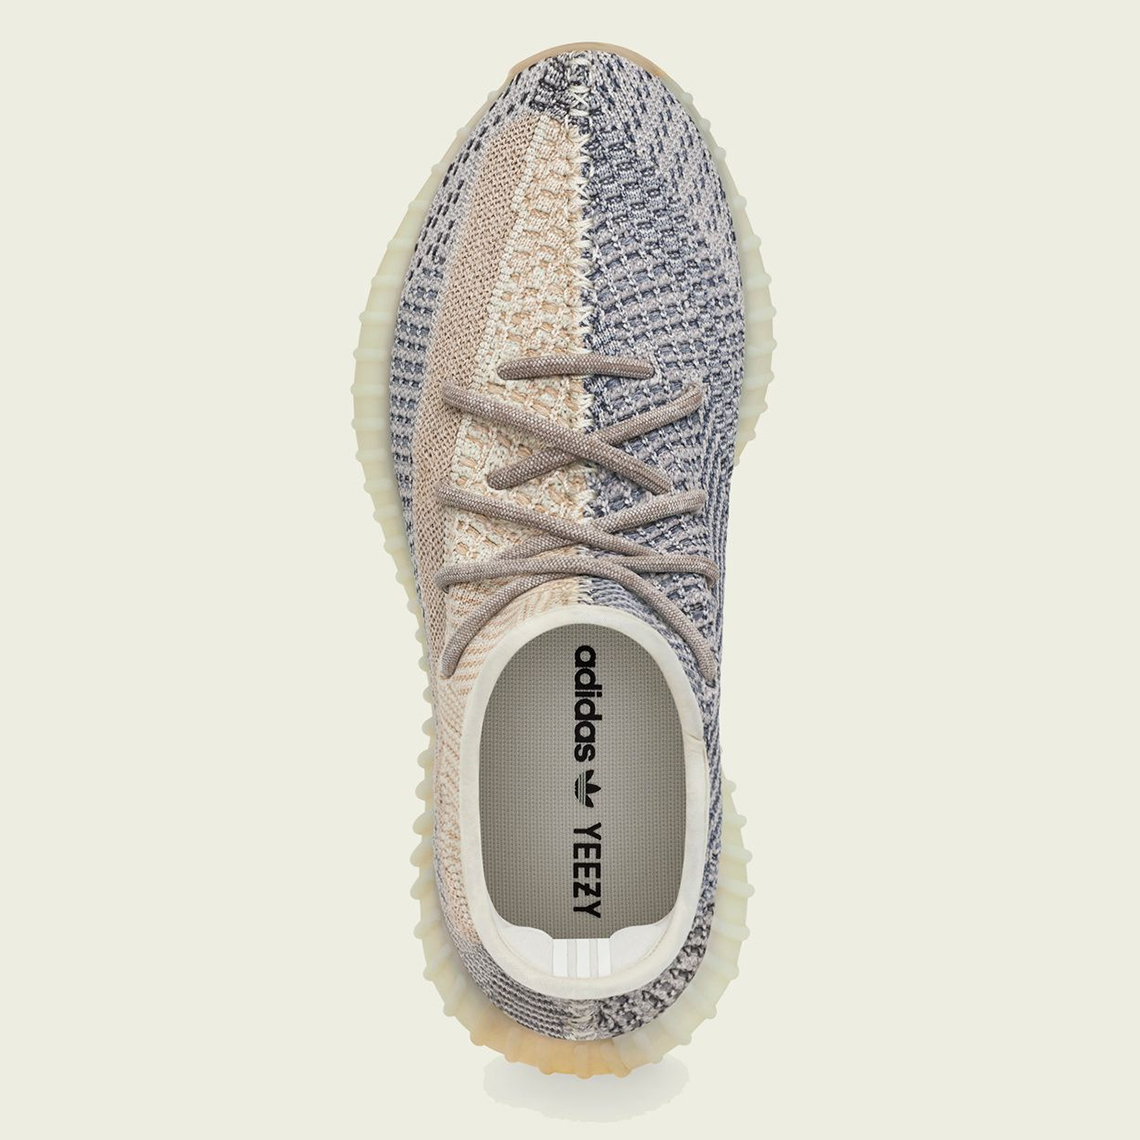 Adidas Yeezy Boost 350 V2 Ash Blue Gy7658 Official Images 4